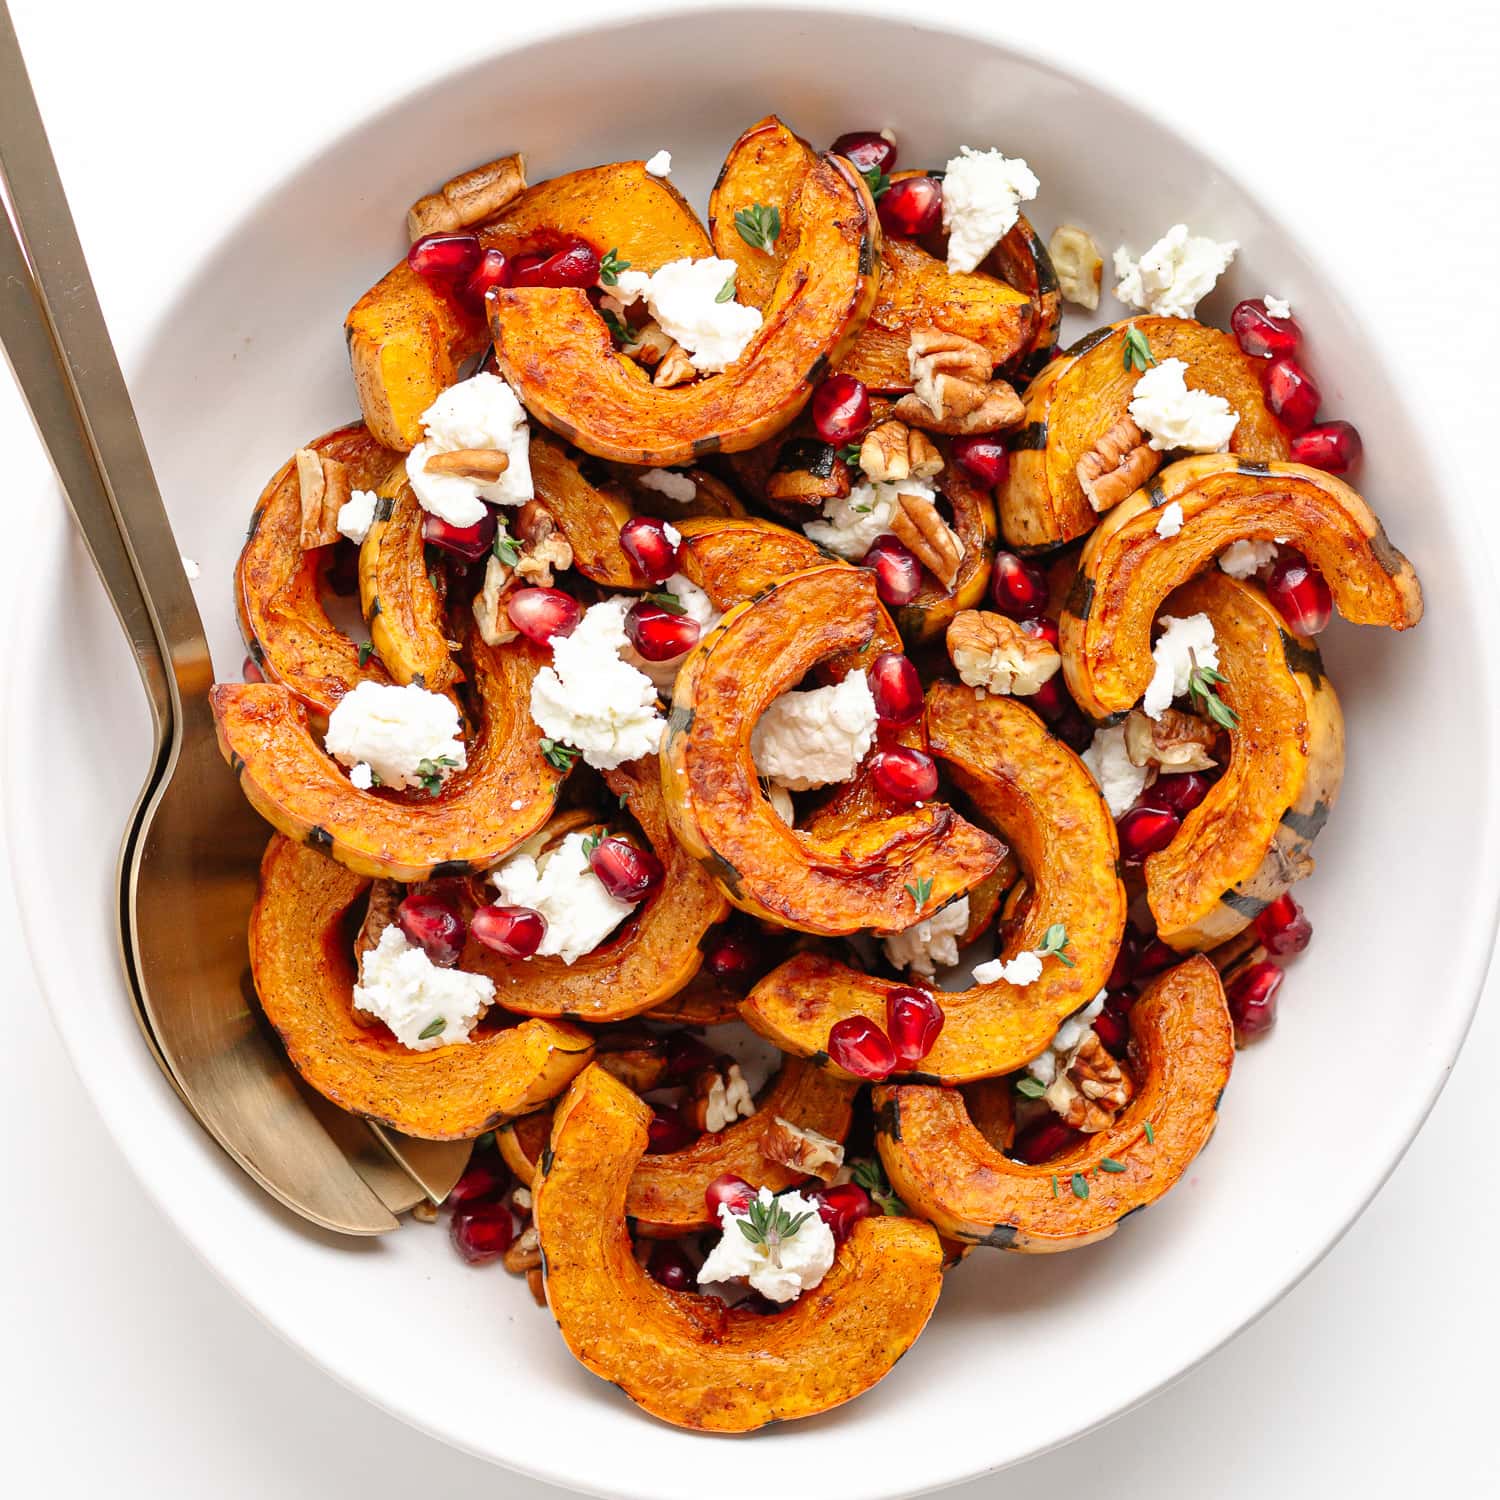 Roasted delicata squash slices in a white serving bowl garnished with pomegranate arils, pecans, thyme and goat cheese.